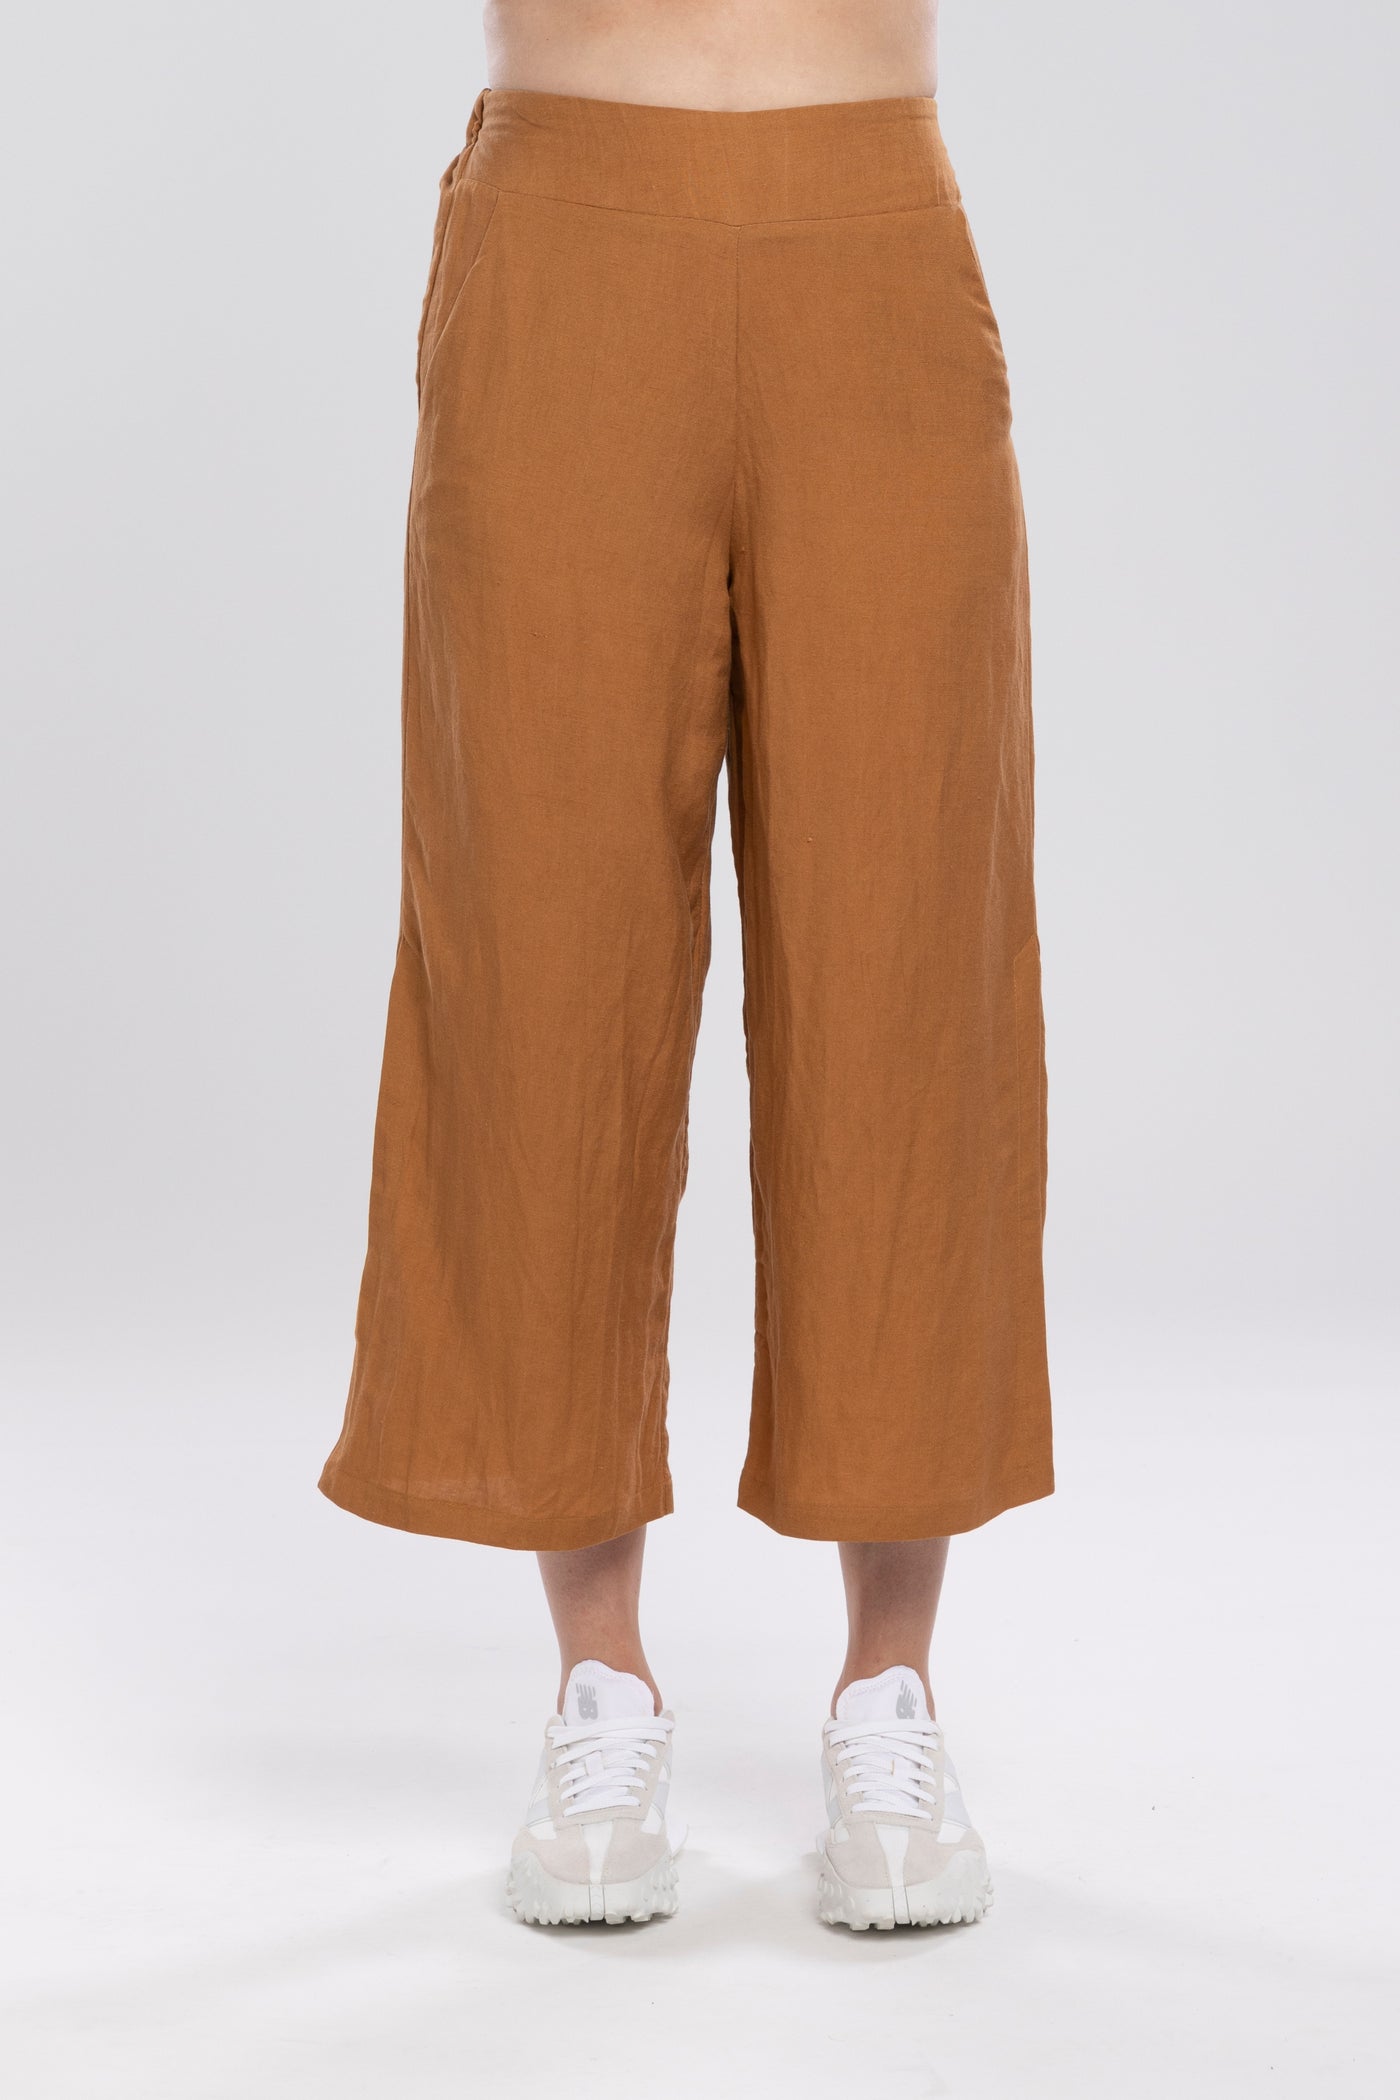 Ultimate in comfort & style!  The division Linen pant a NES Fav and a go to transeasonal pant. perfect for travelling and great to dress up or down. 